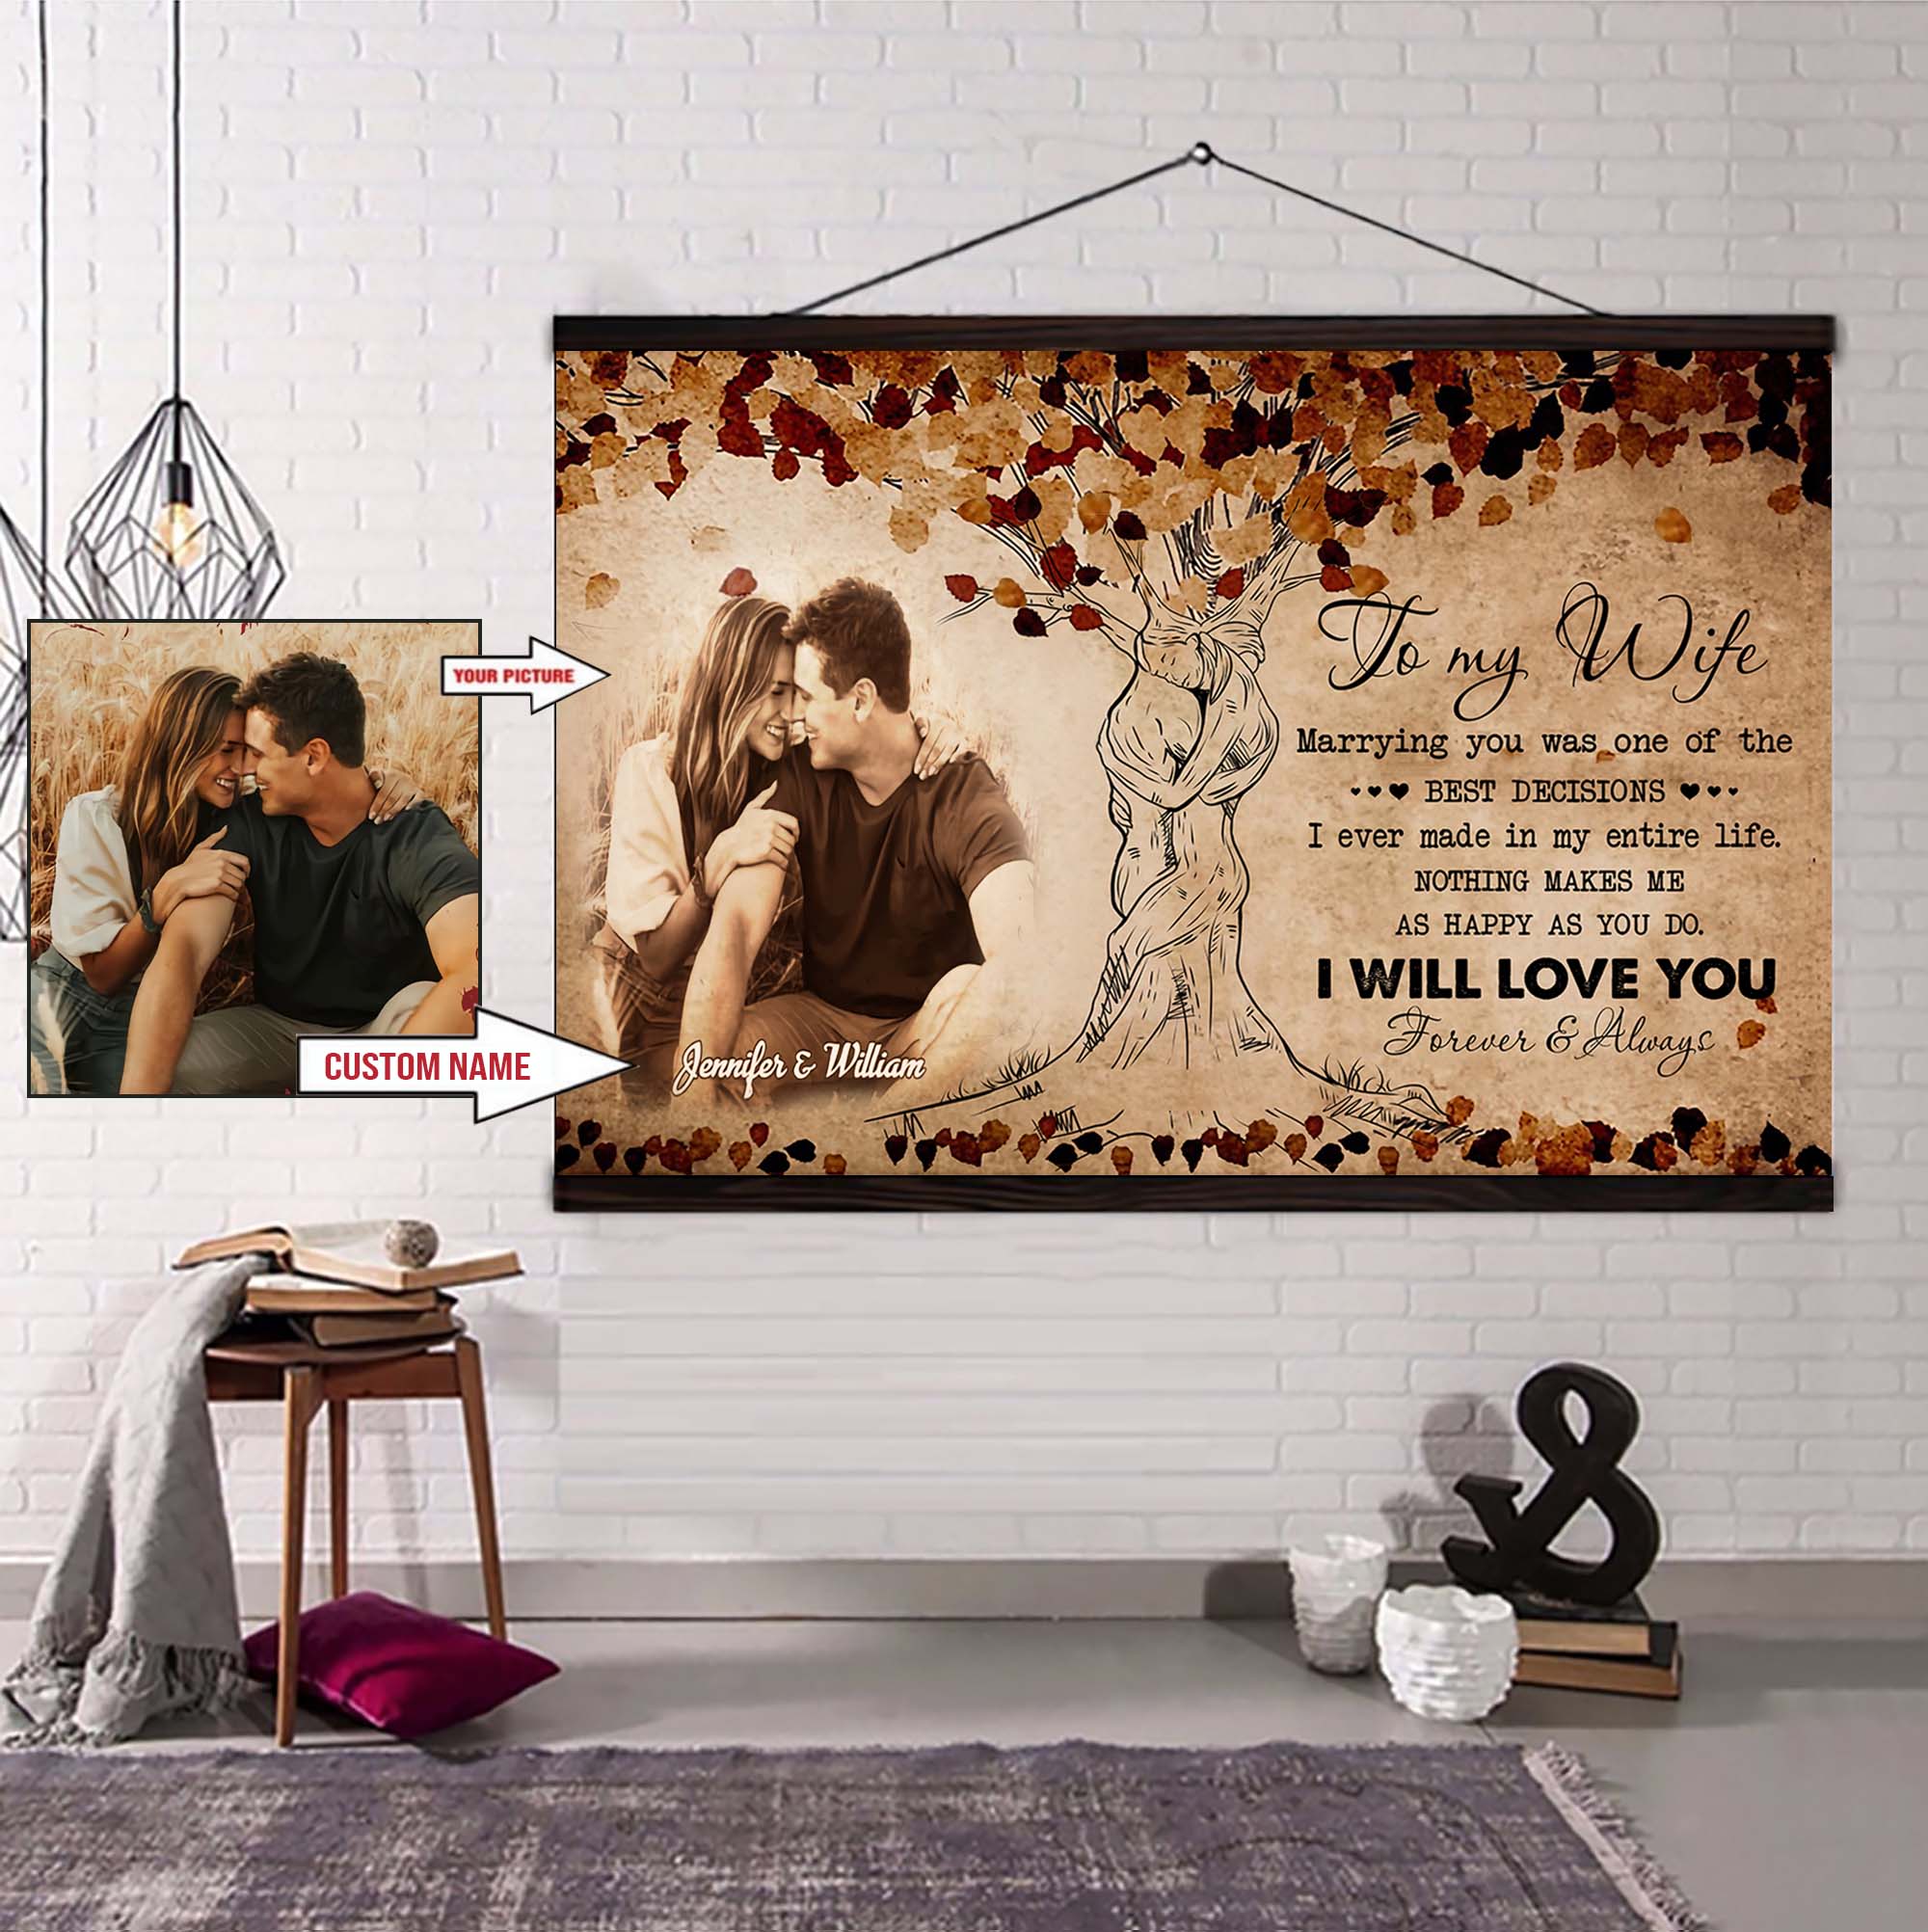 Valentines gifts-Poster canvas-Custom Image- Husband to Wife- You are braver than you believe